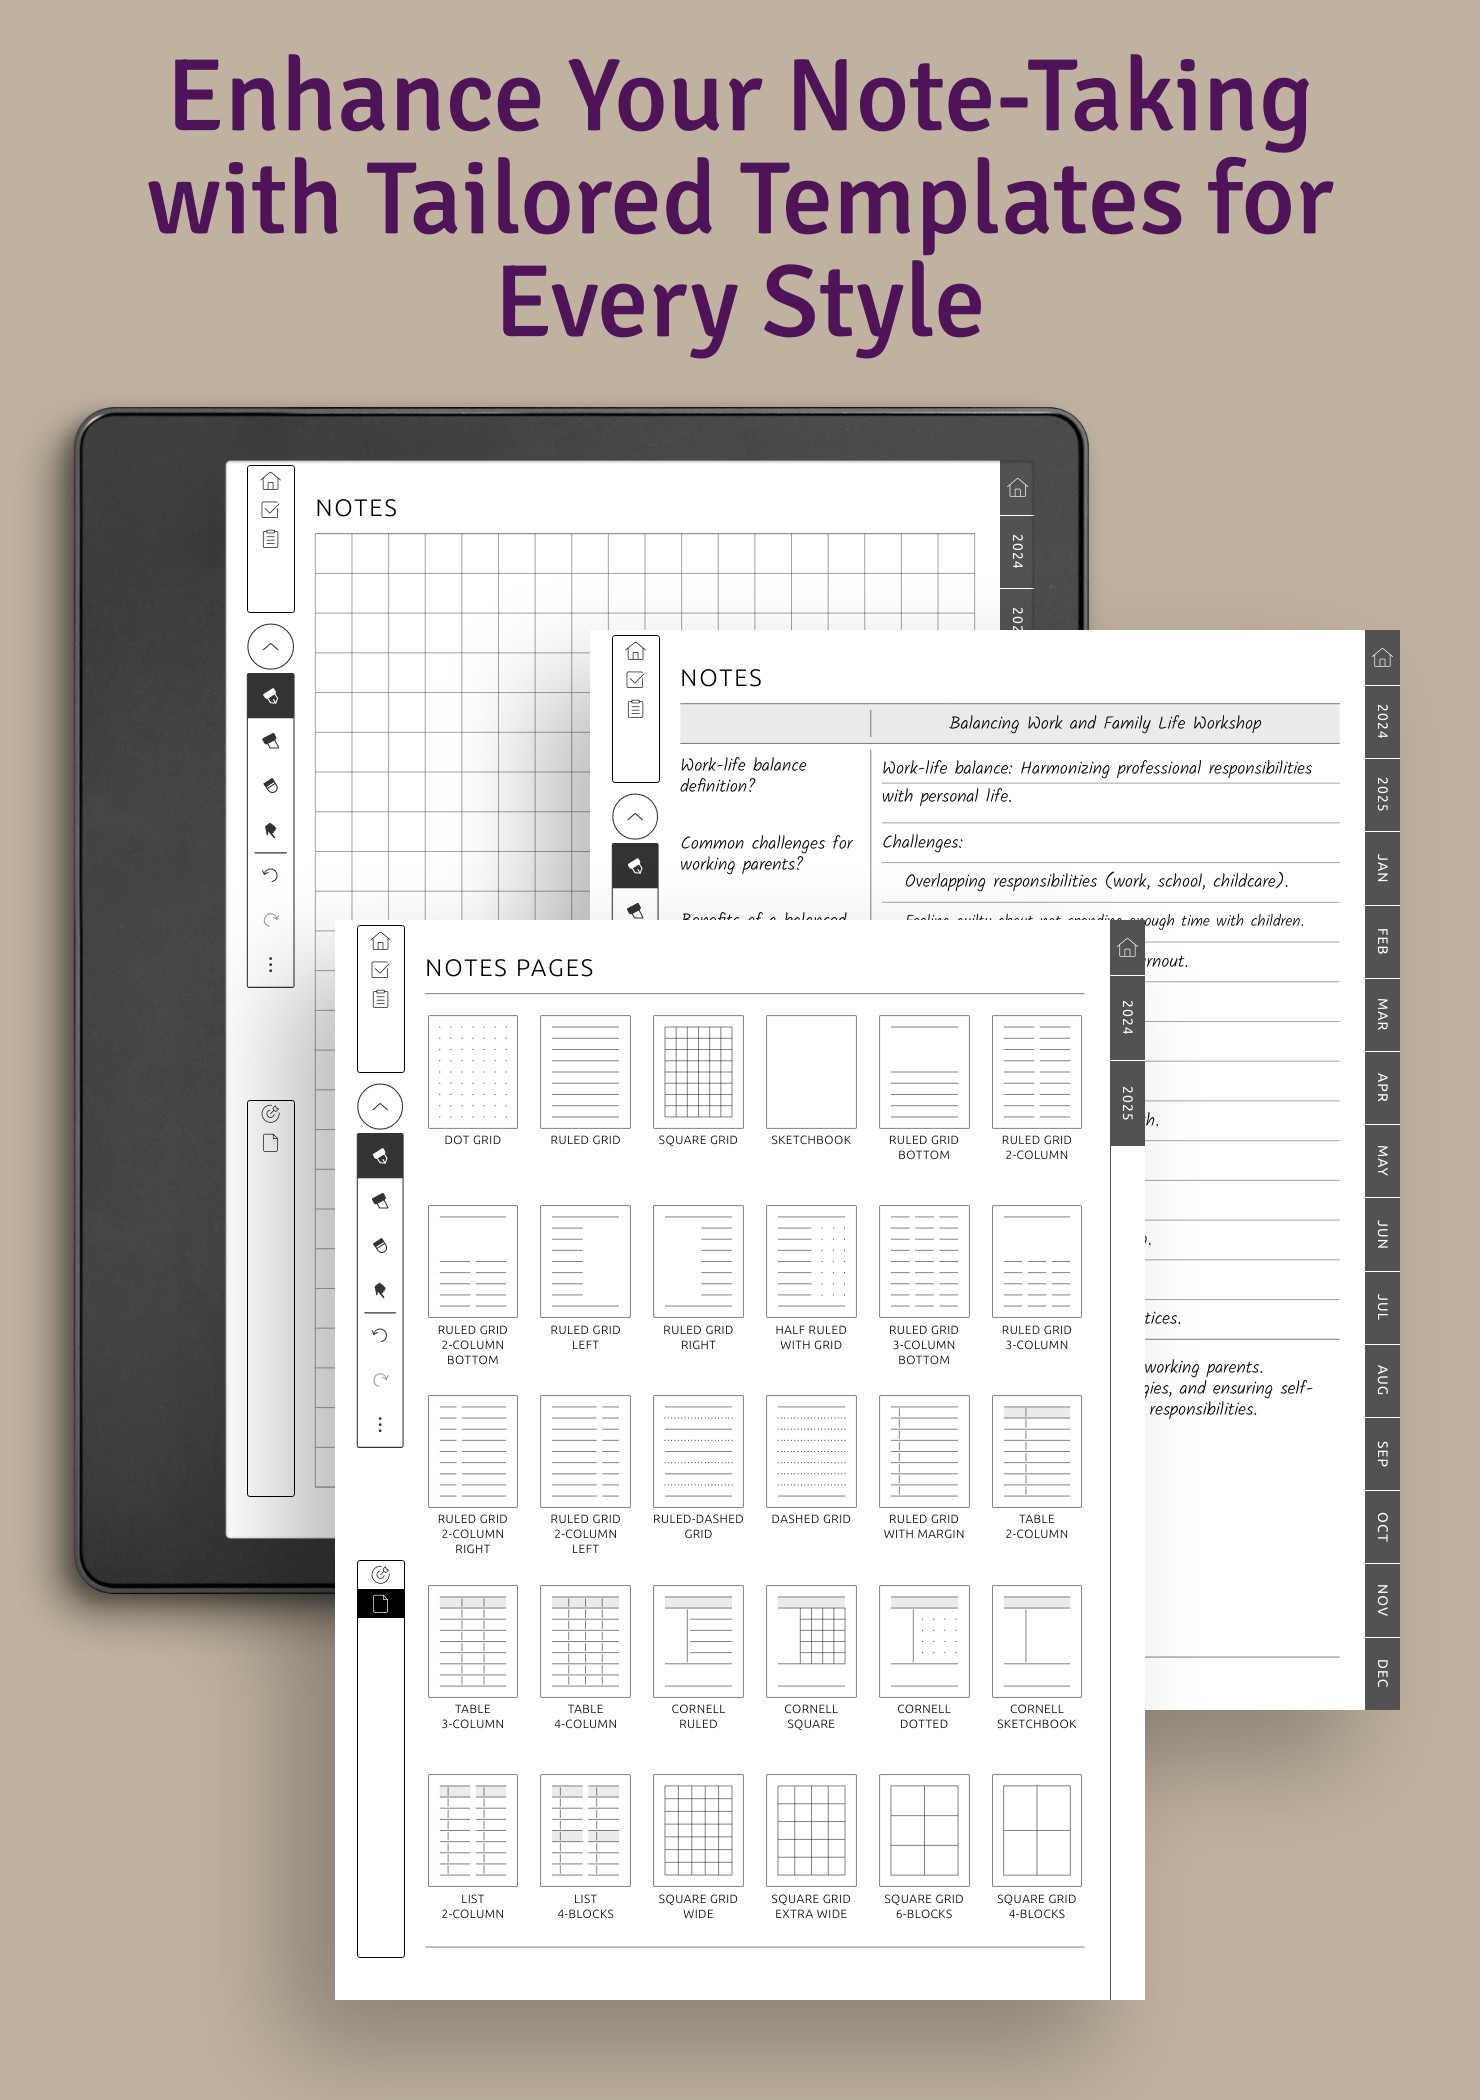 Refine Your Note-Taking with Customized Templates for Every Preference